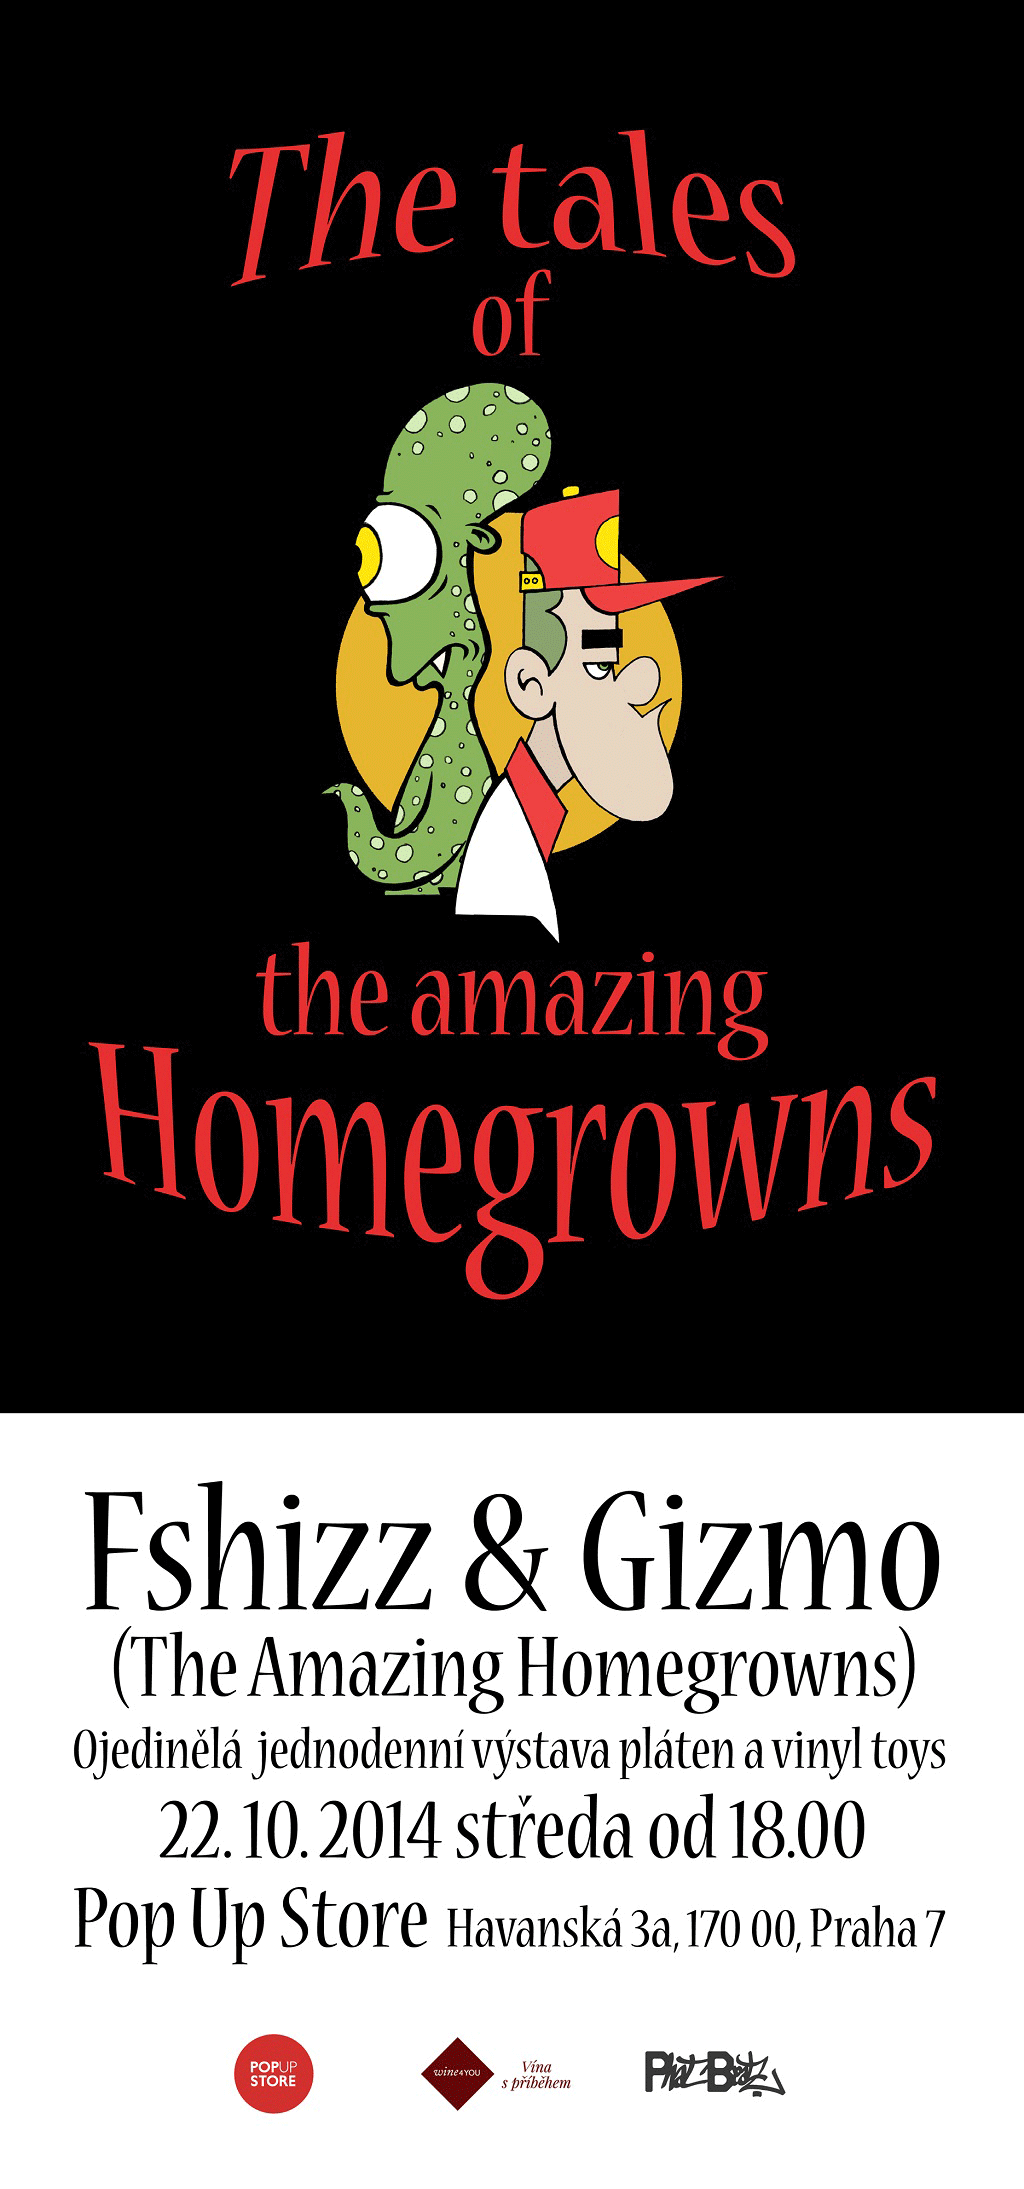 The Tales of the Amazing Homegrowns